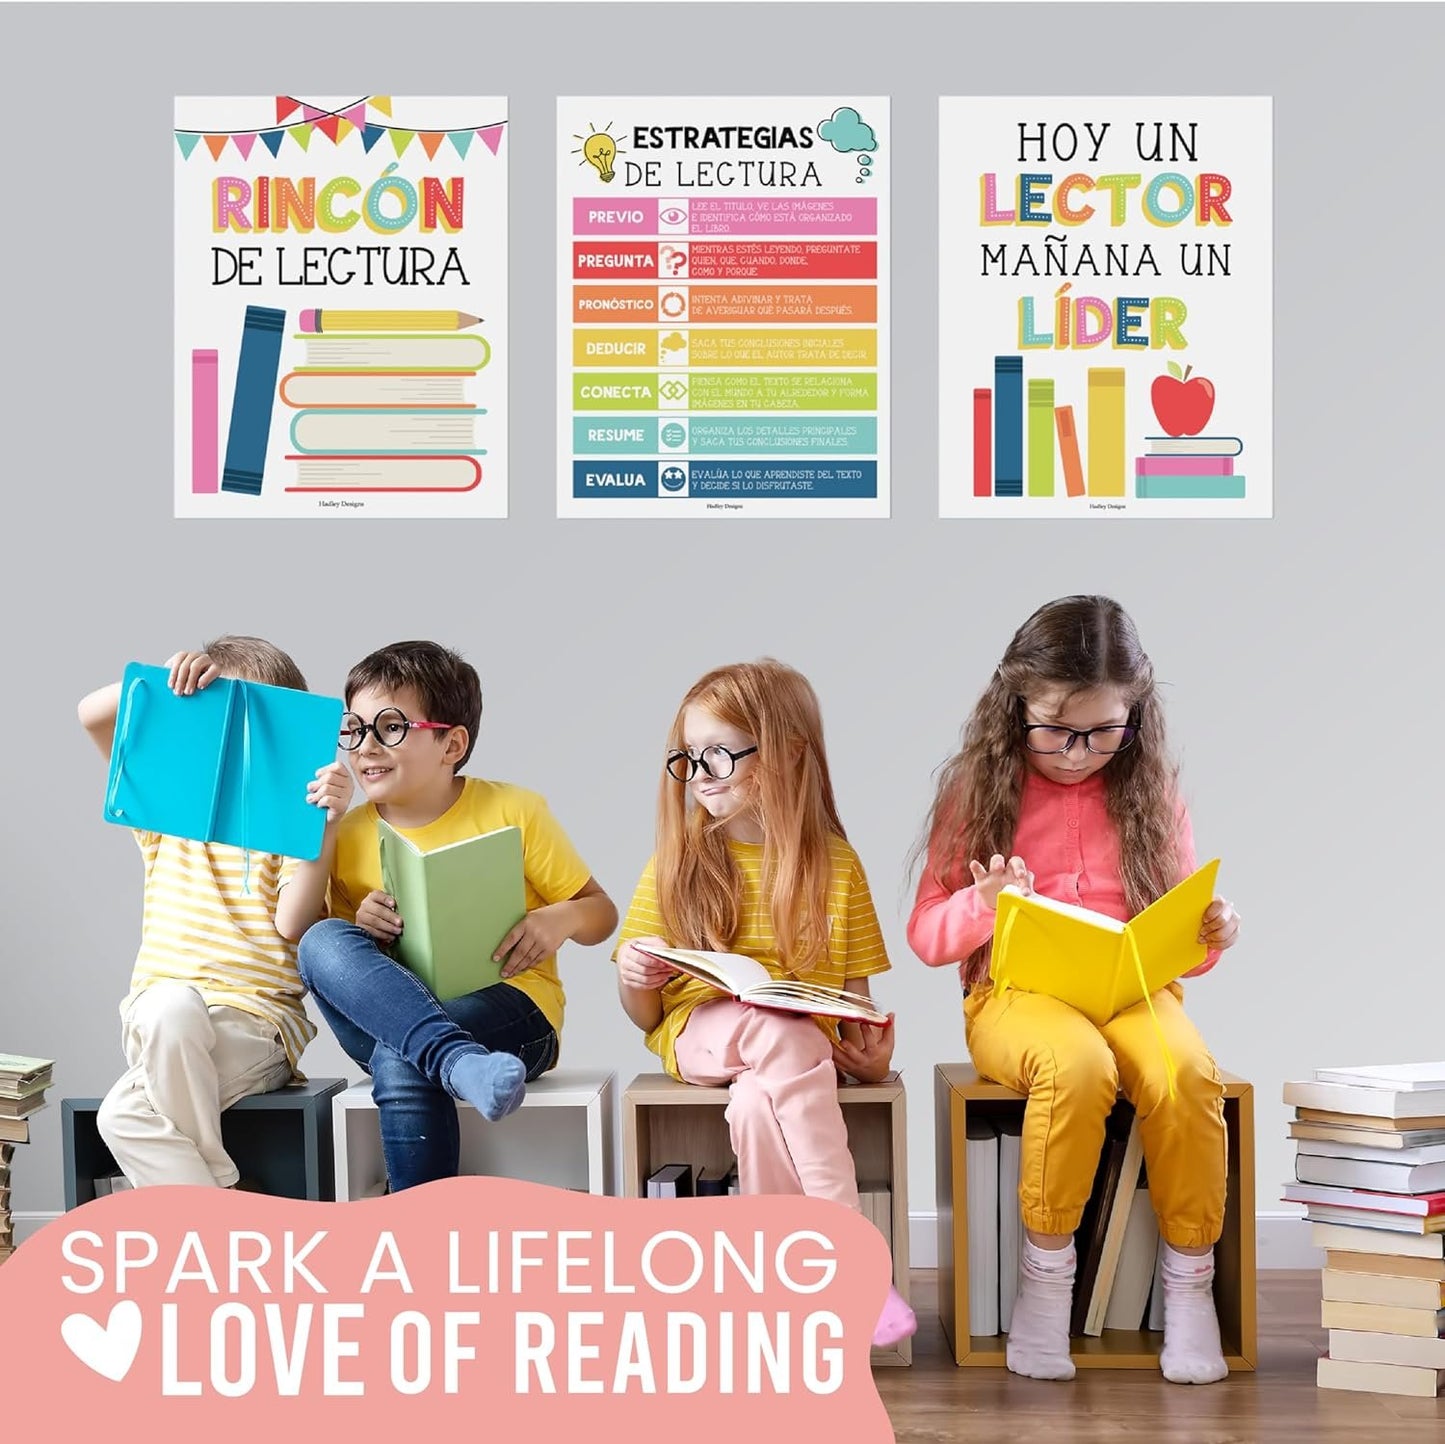 6 Colorful Spanish Classroom Decorations High School - Spanish Classroom Posters, Decoracion De Area Para Salon De Lectura Posters, Rincon De Lectura Decoracion Para Salon De Clases En Español